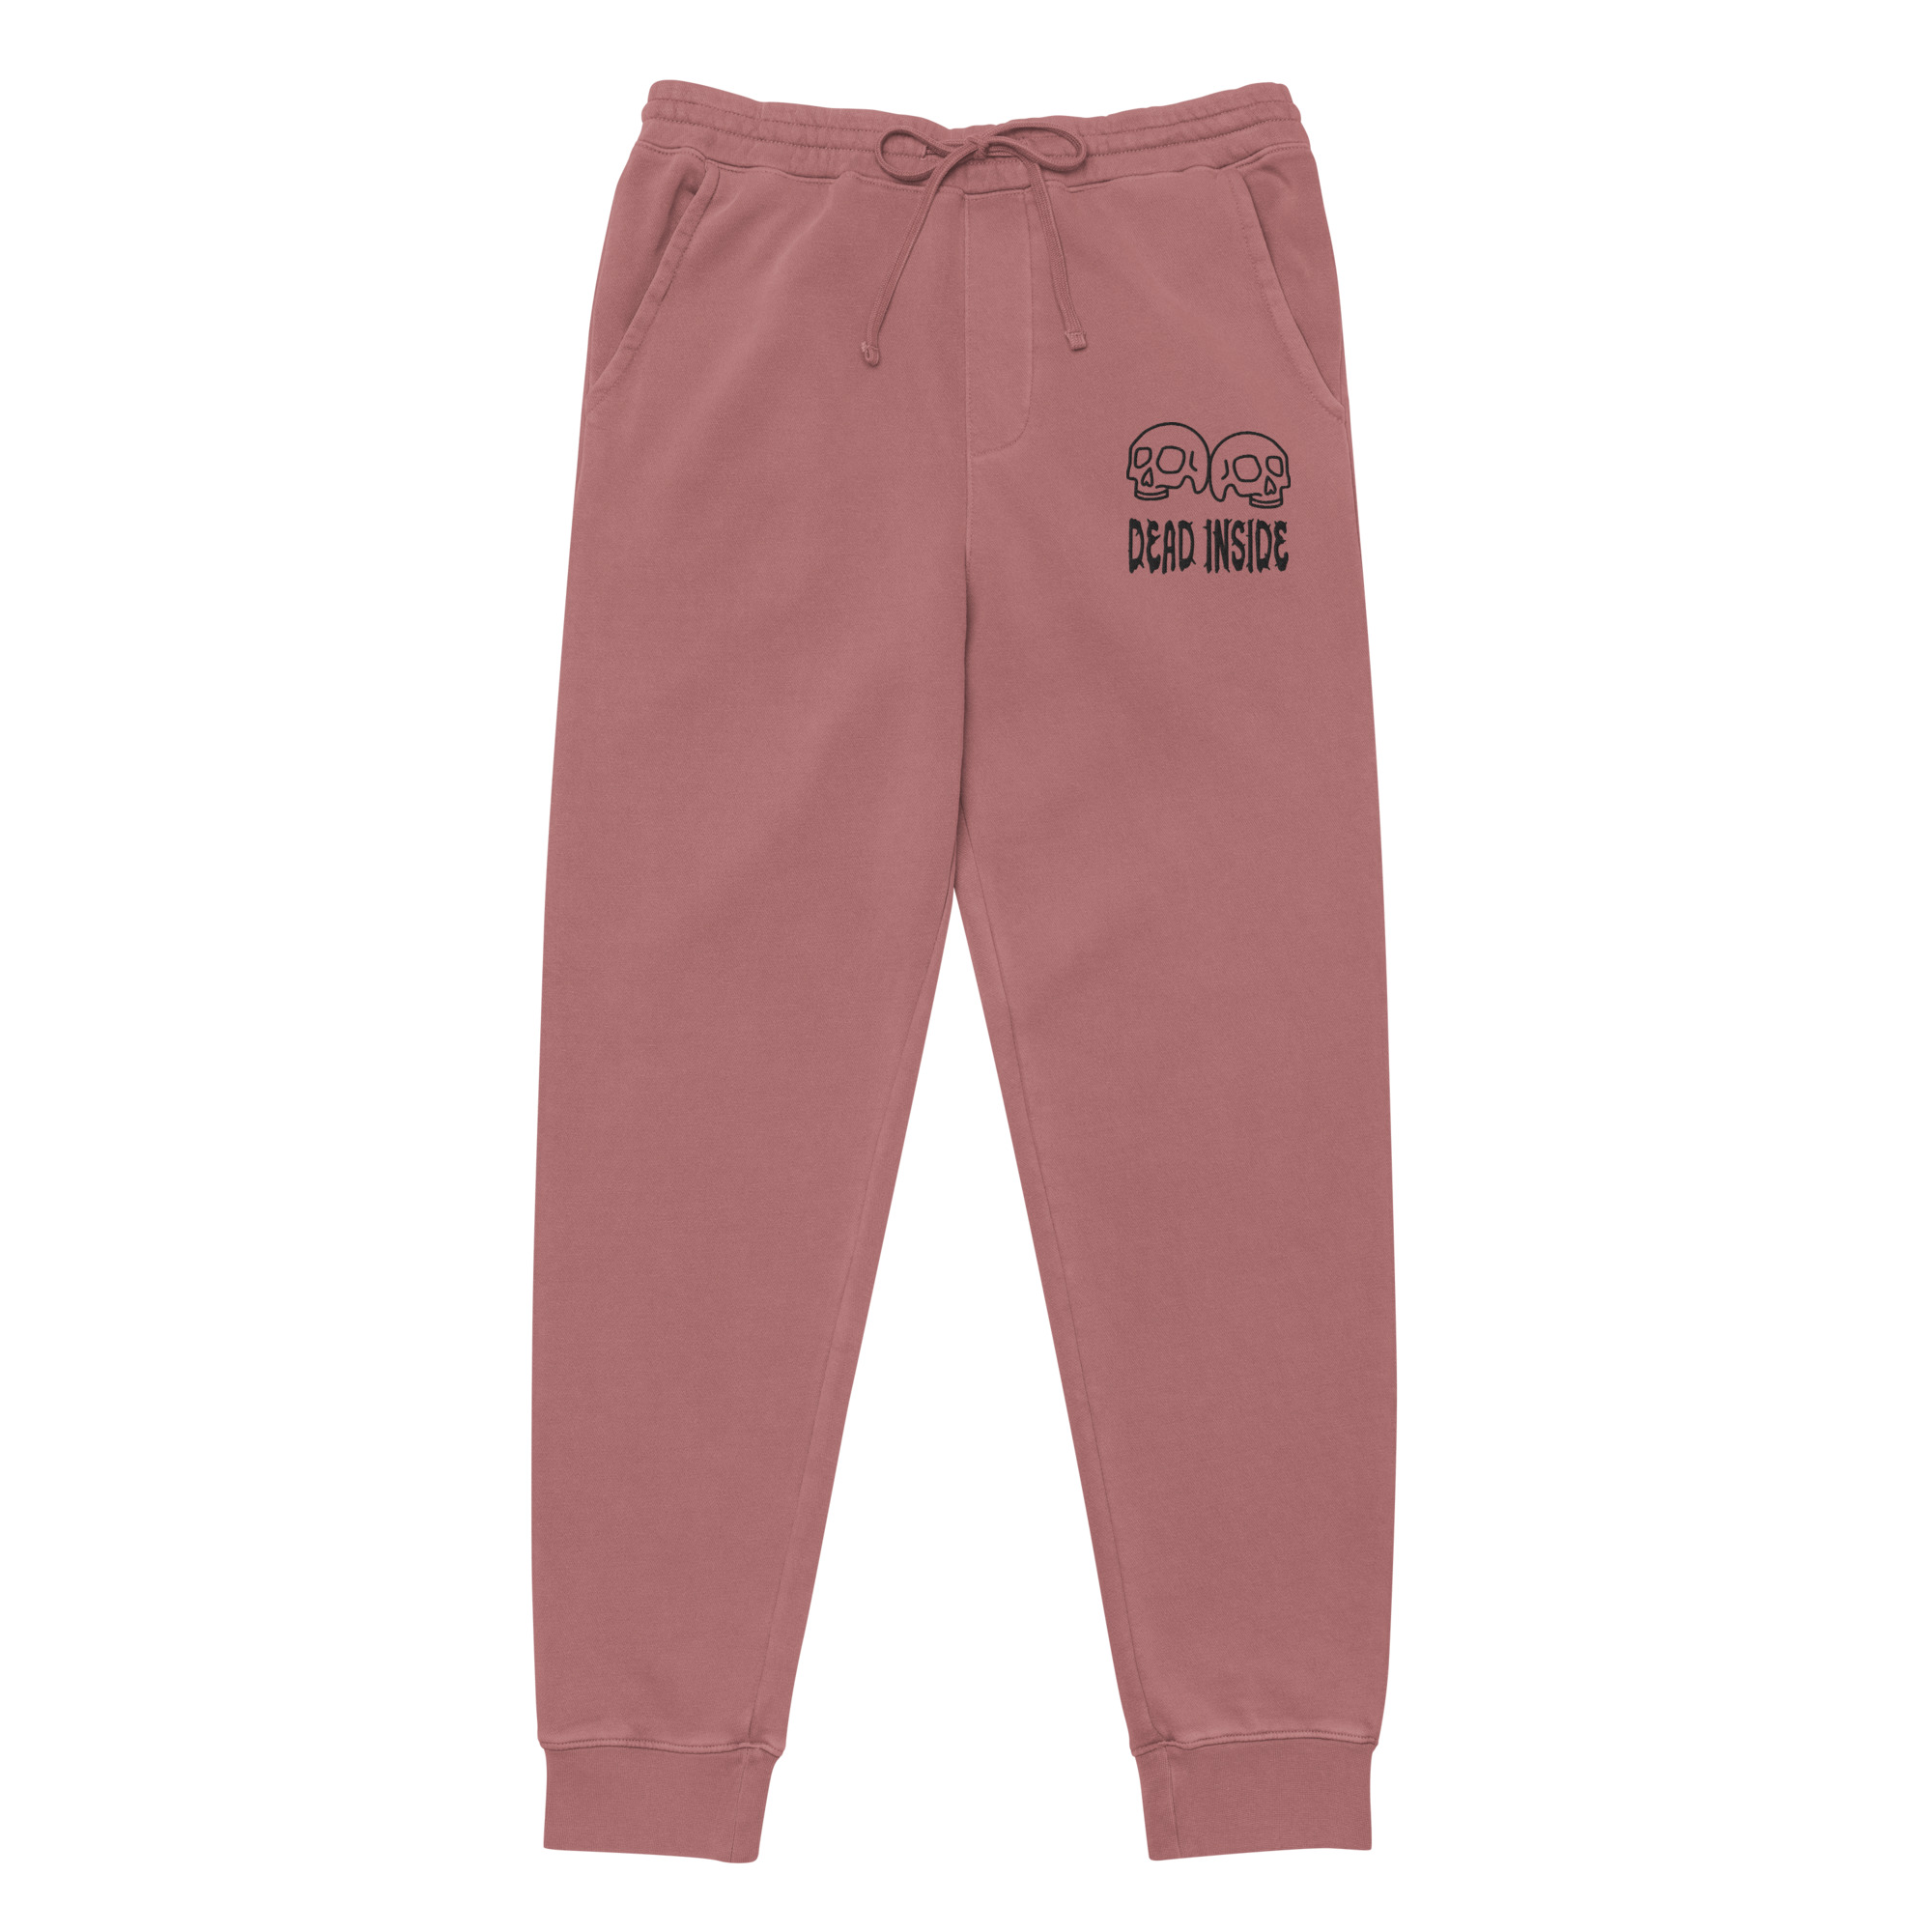 Featured image for “Dead Inside - Unisex pigment-dyed sweatpants”